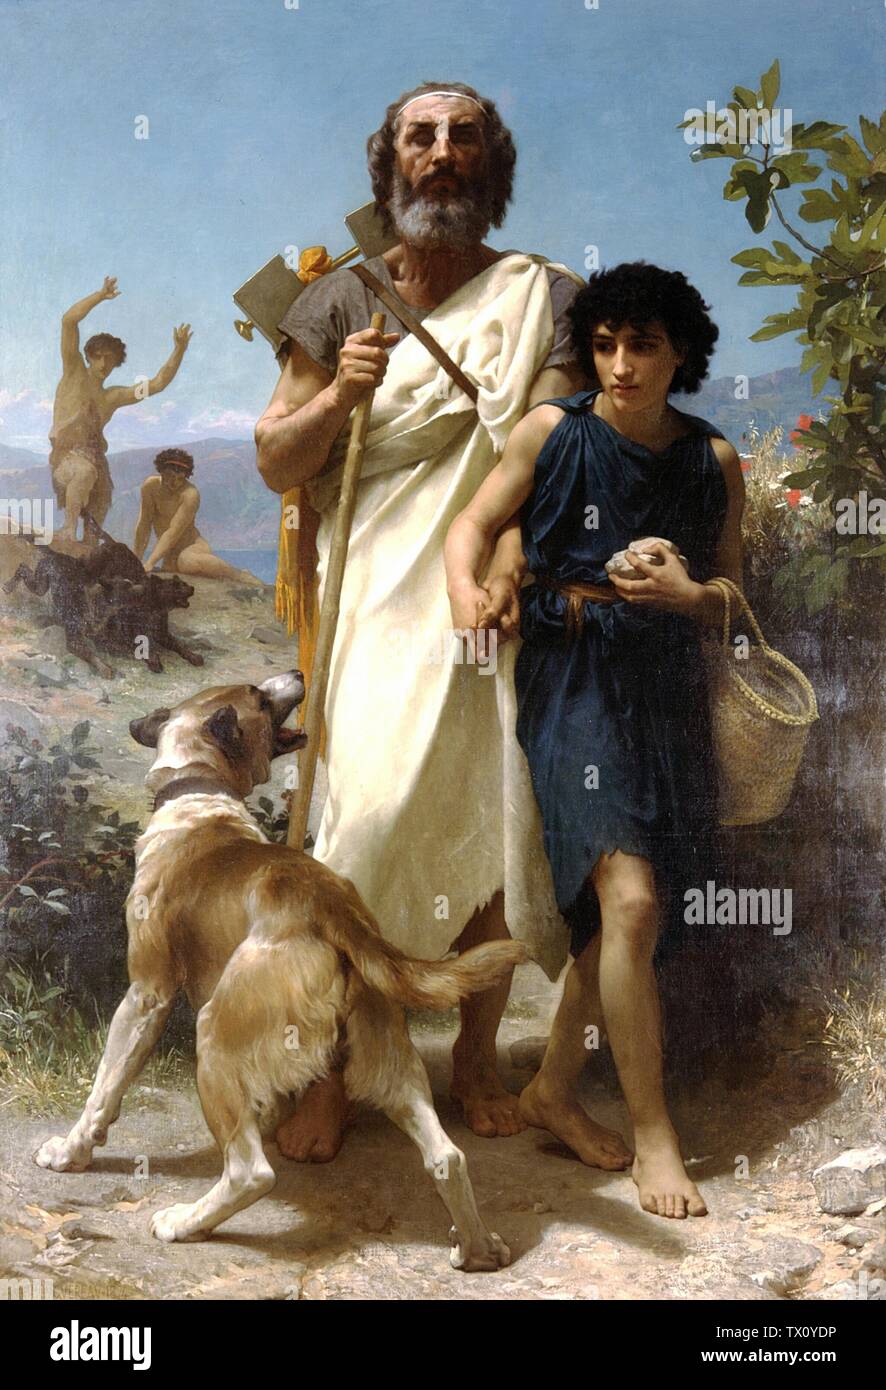 Homer and his Guide (1874) French Academic painting by William-Adolphe Bouguereau - Very high resolution and quality image Stock Photo